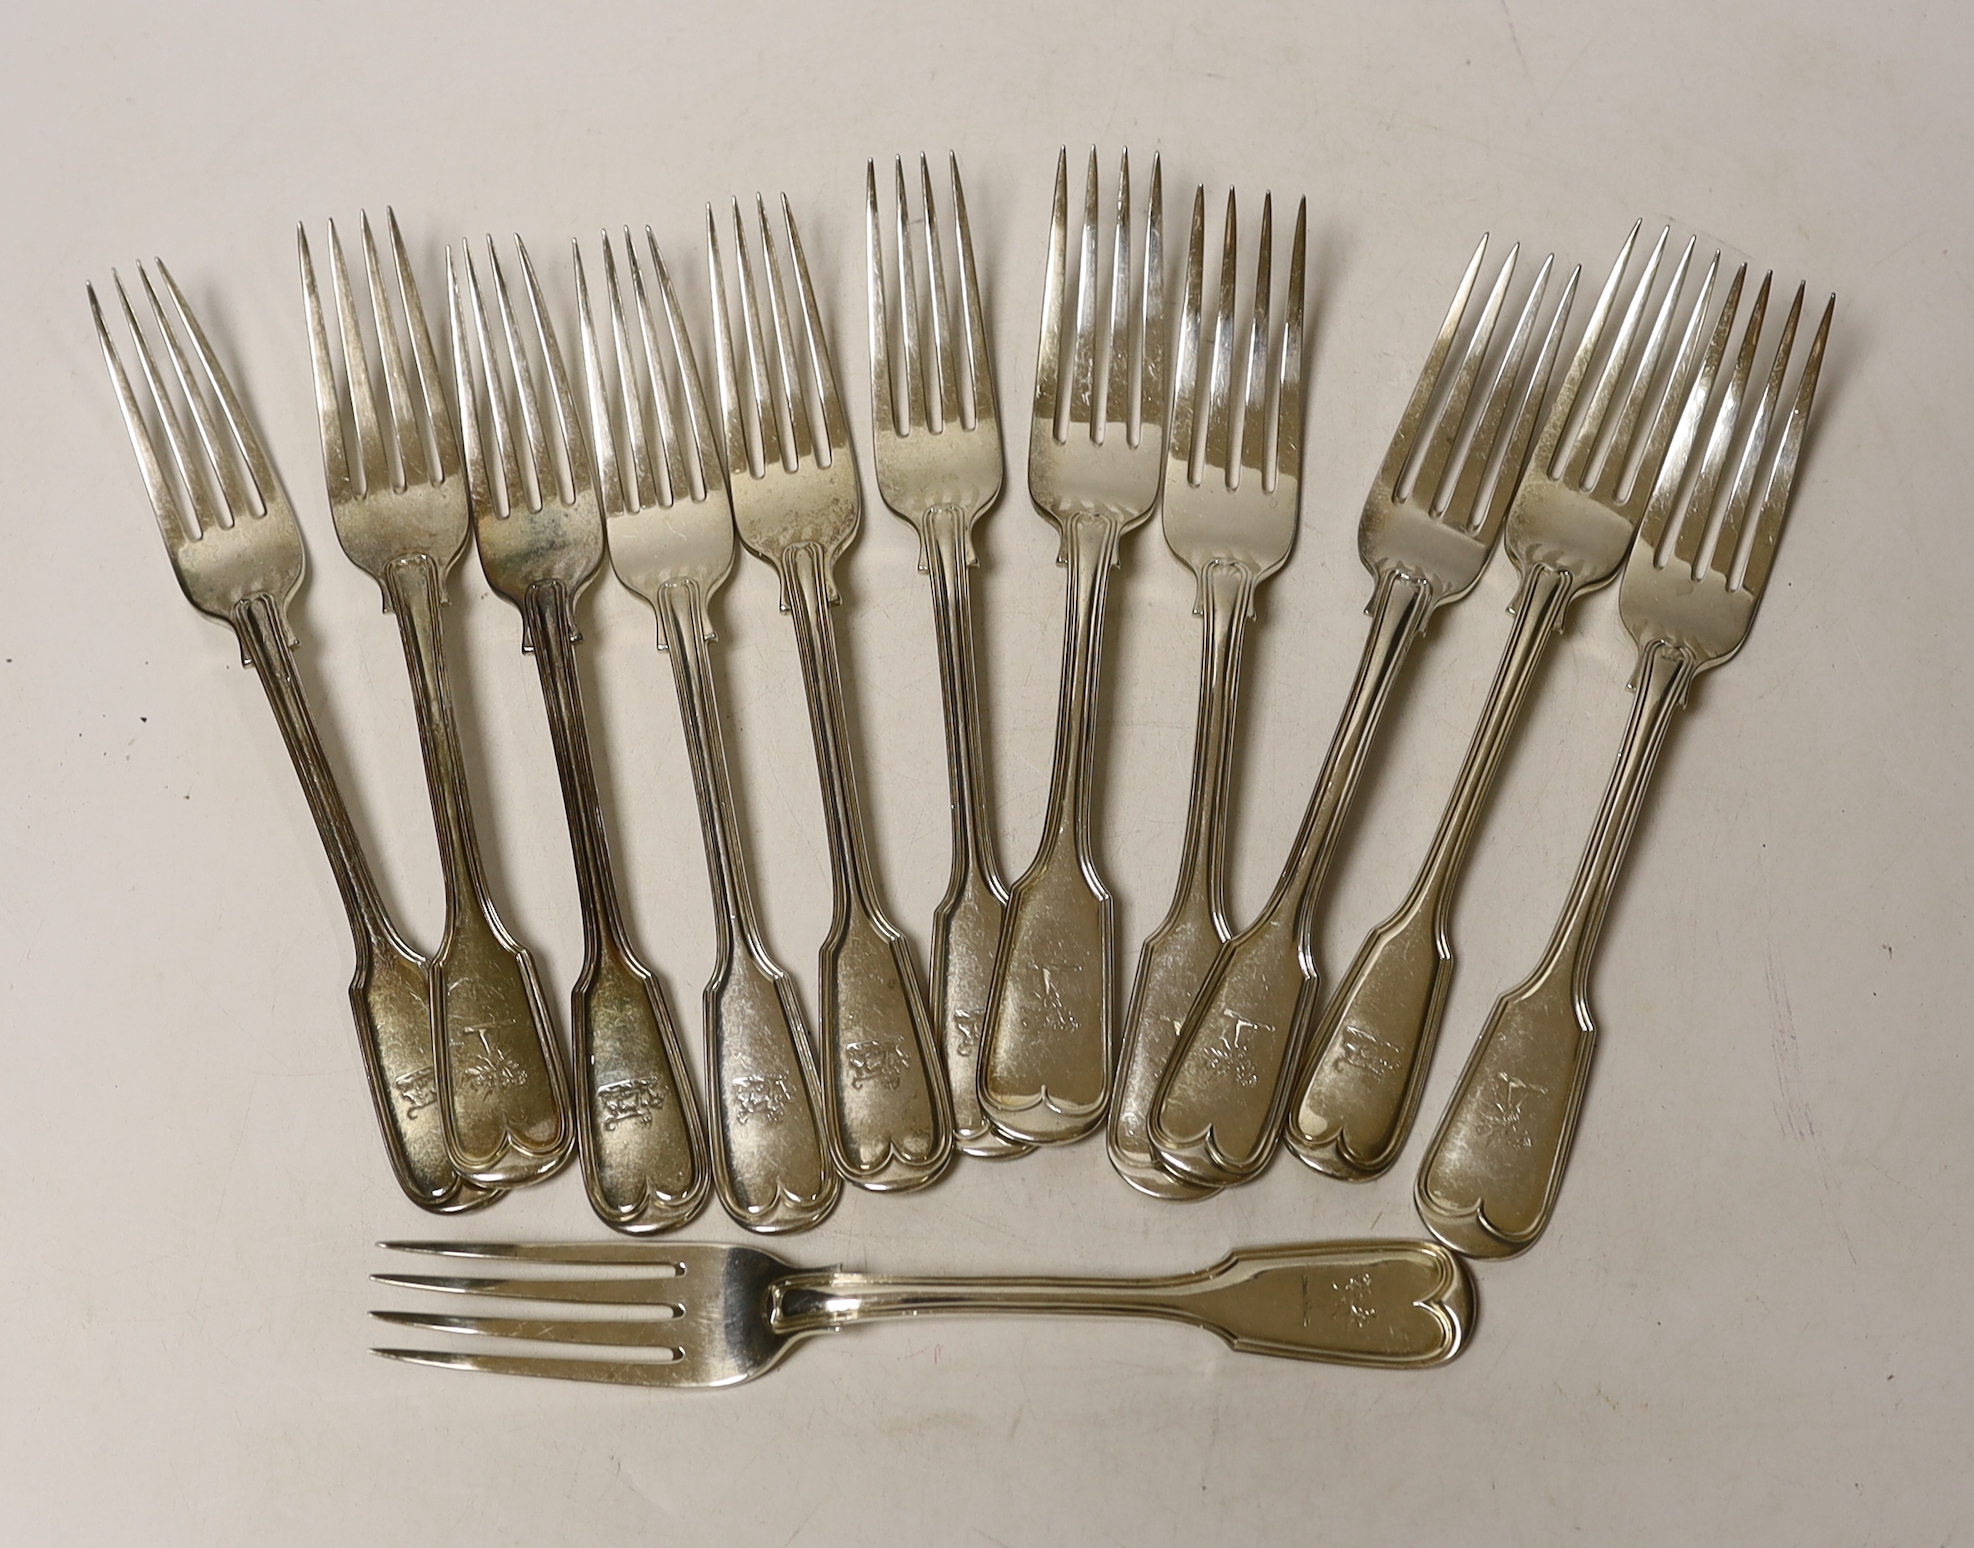 A matched set of twelve 19th century silver fiddle and thread pattern table forks, various dates and makers, including Exeter, some hallmarks very rubbed, 36.1oz.